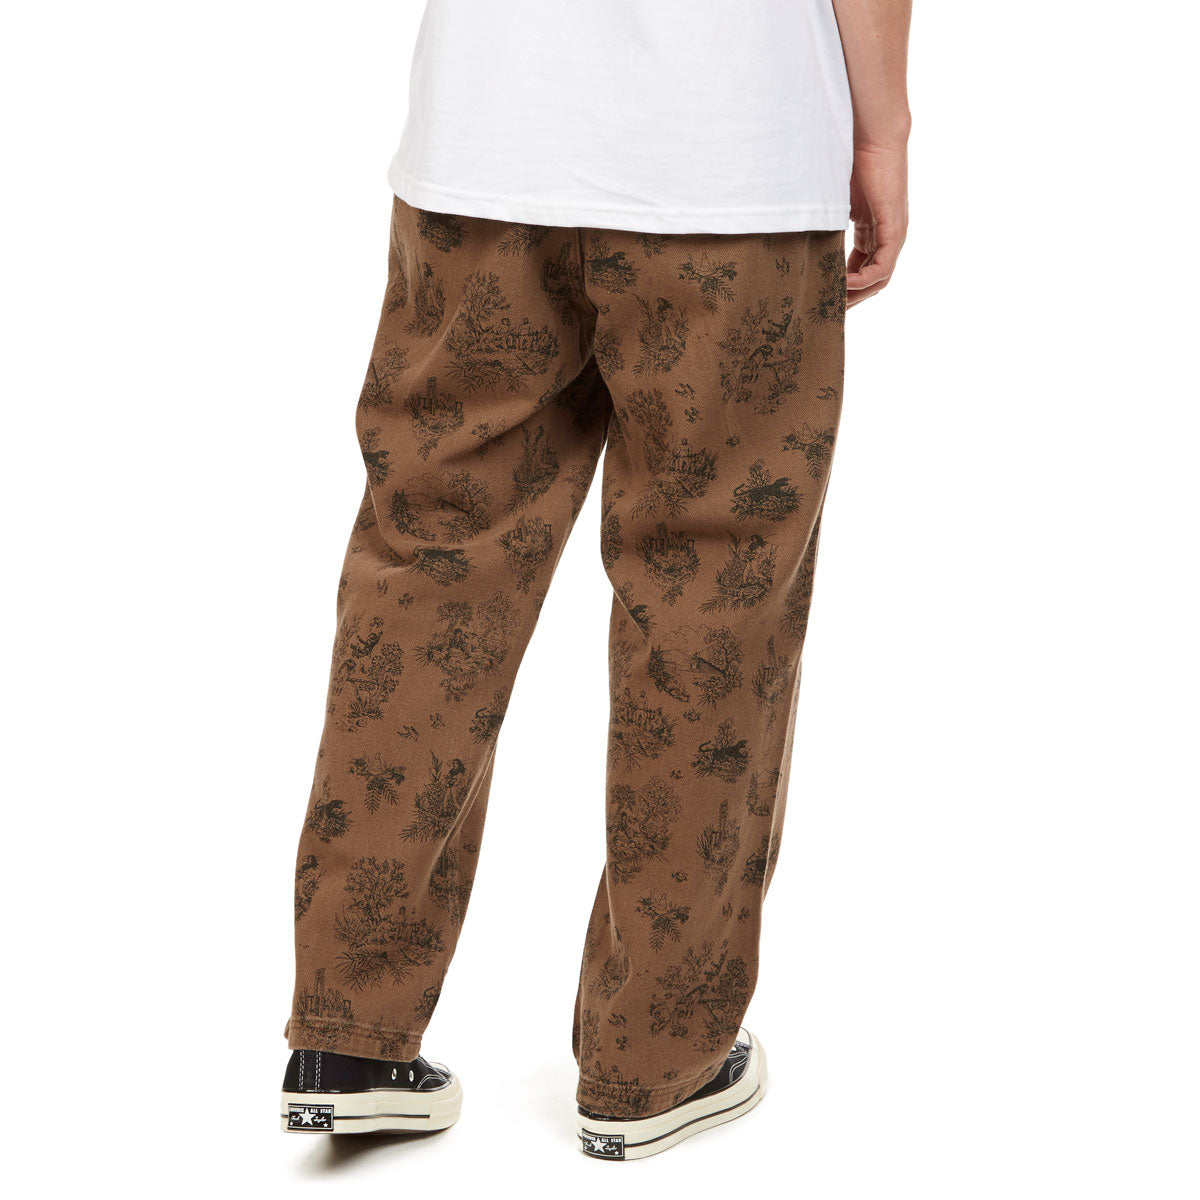 CCS Original Relaxed Toile Chino Pants - Brown Root image 4